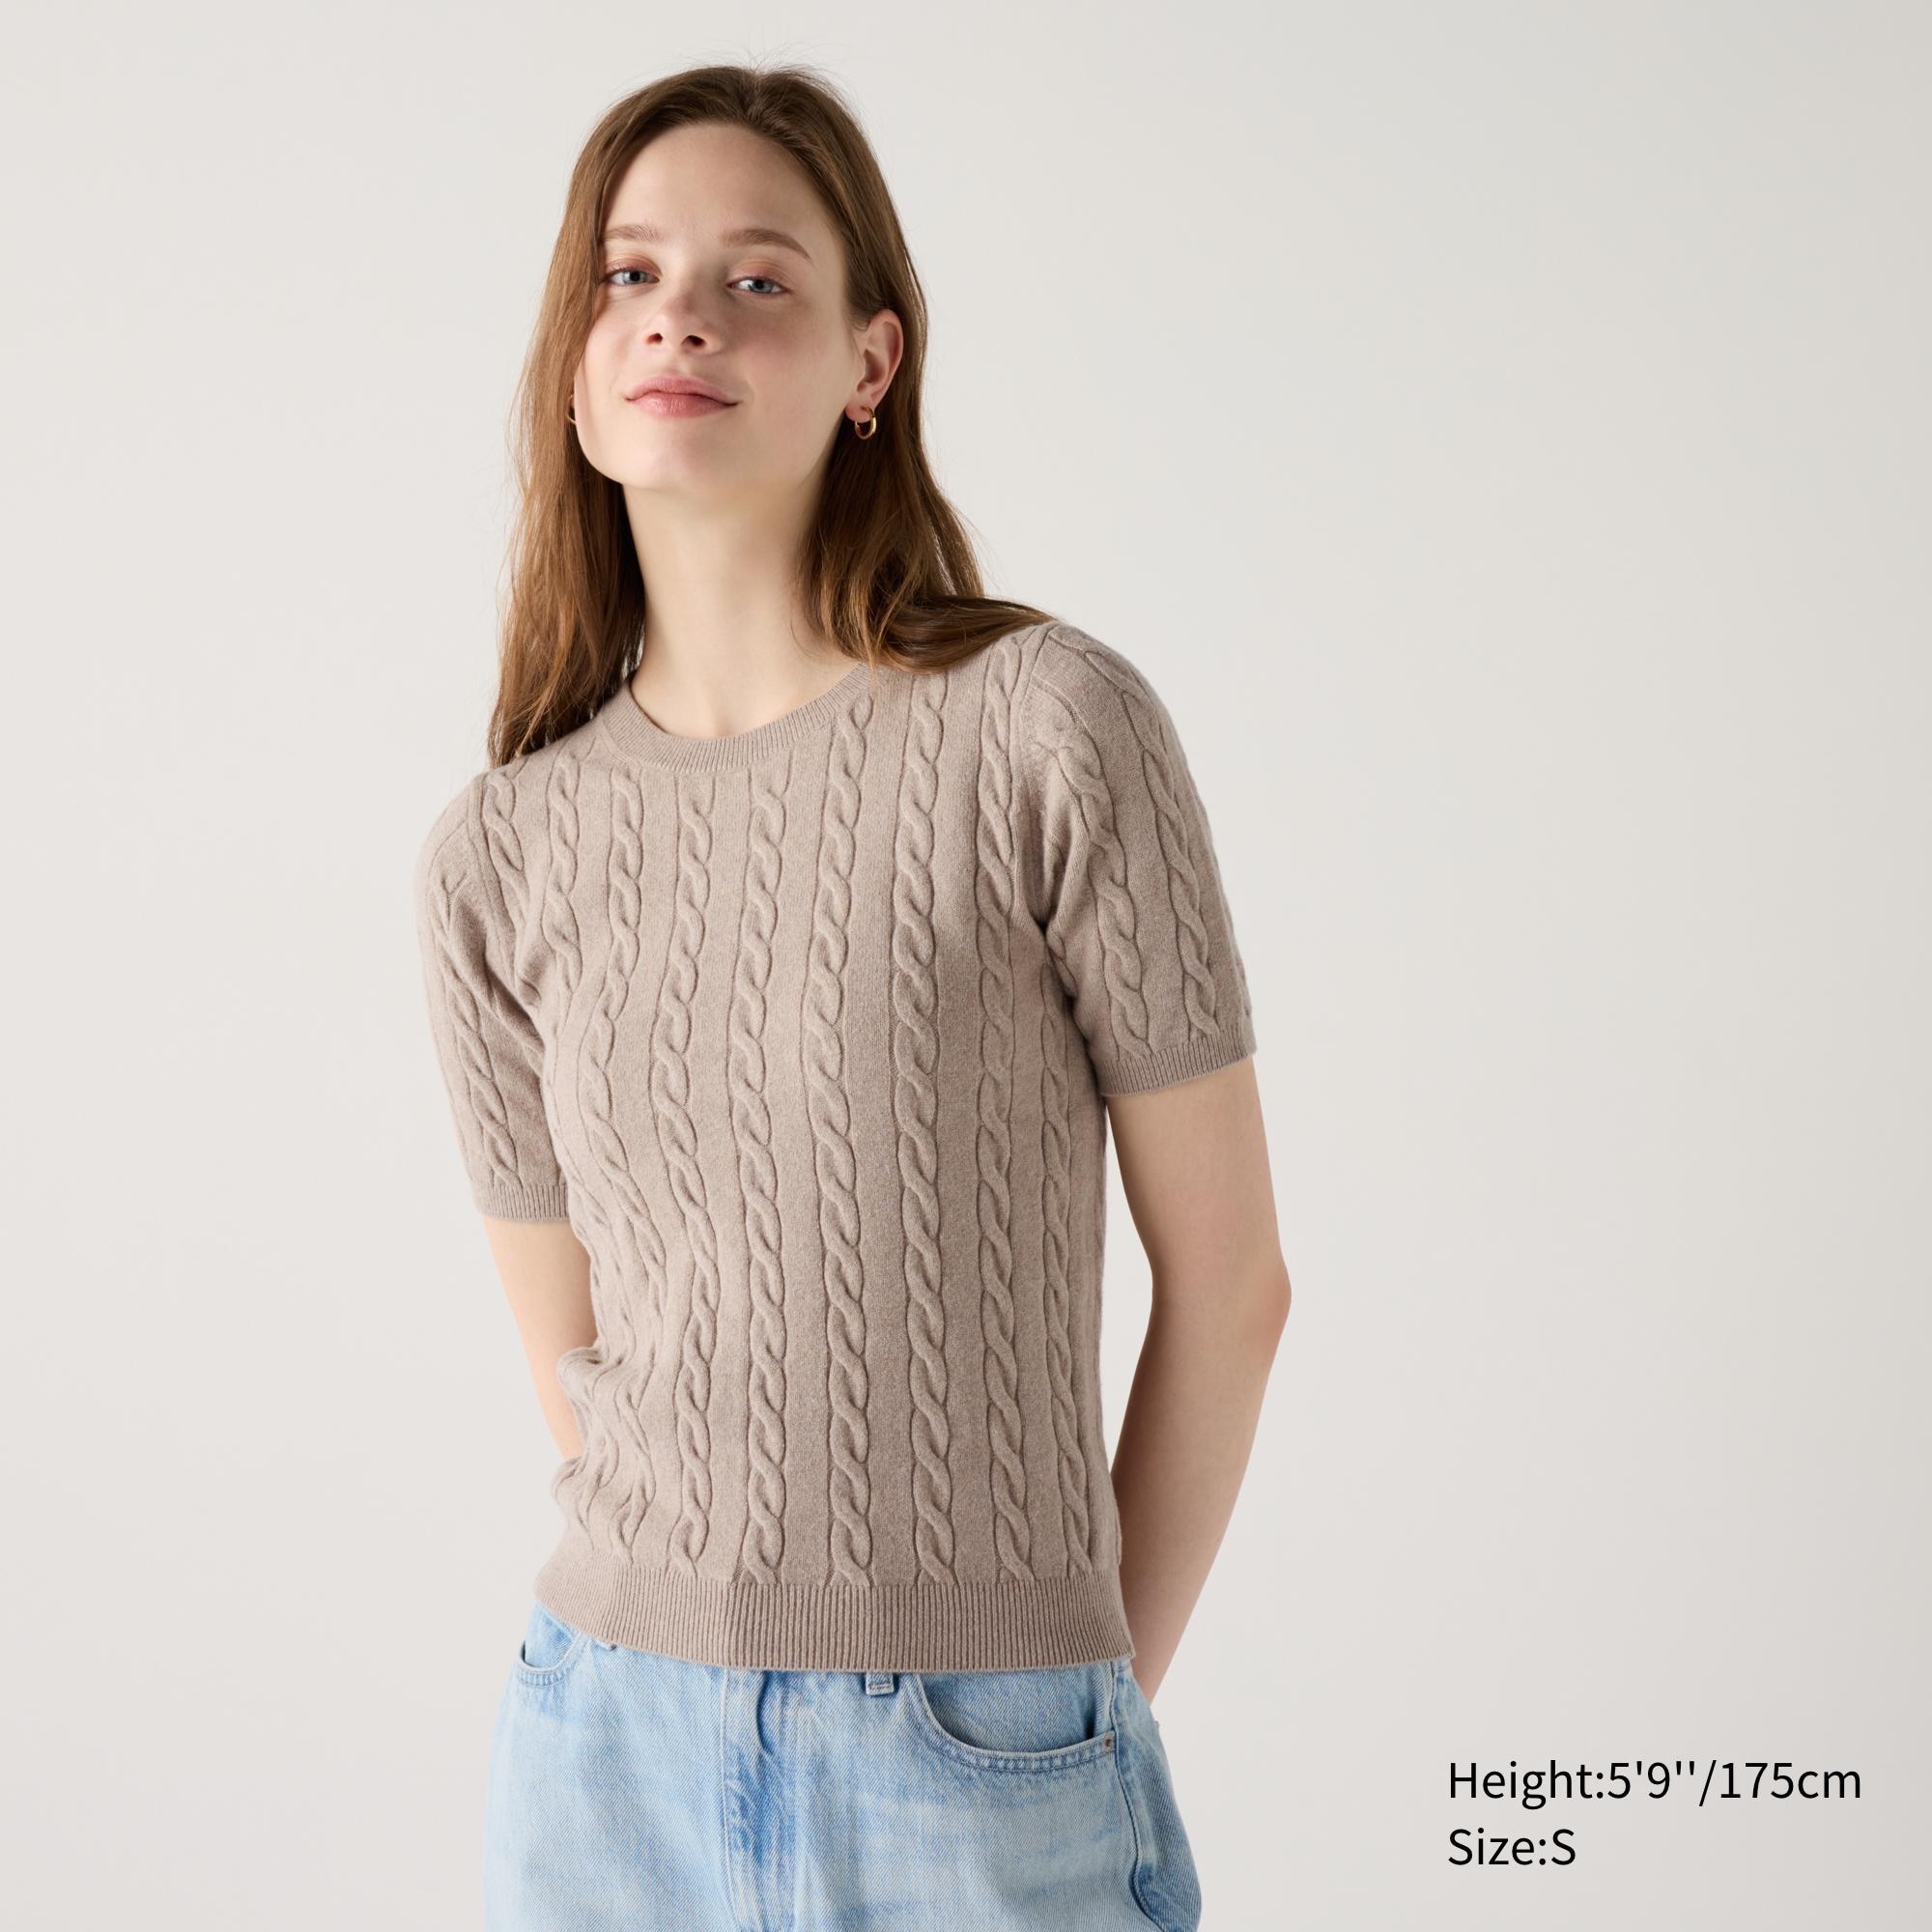 CABLE CREW NECK SWEATER SHORT SLEEVE